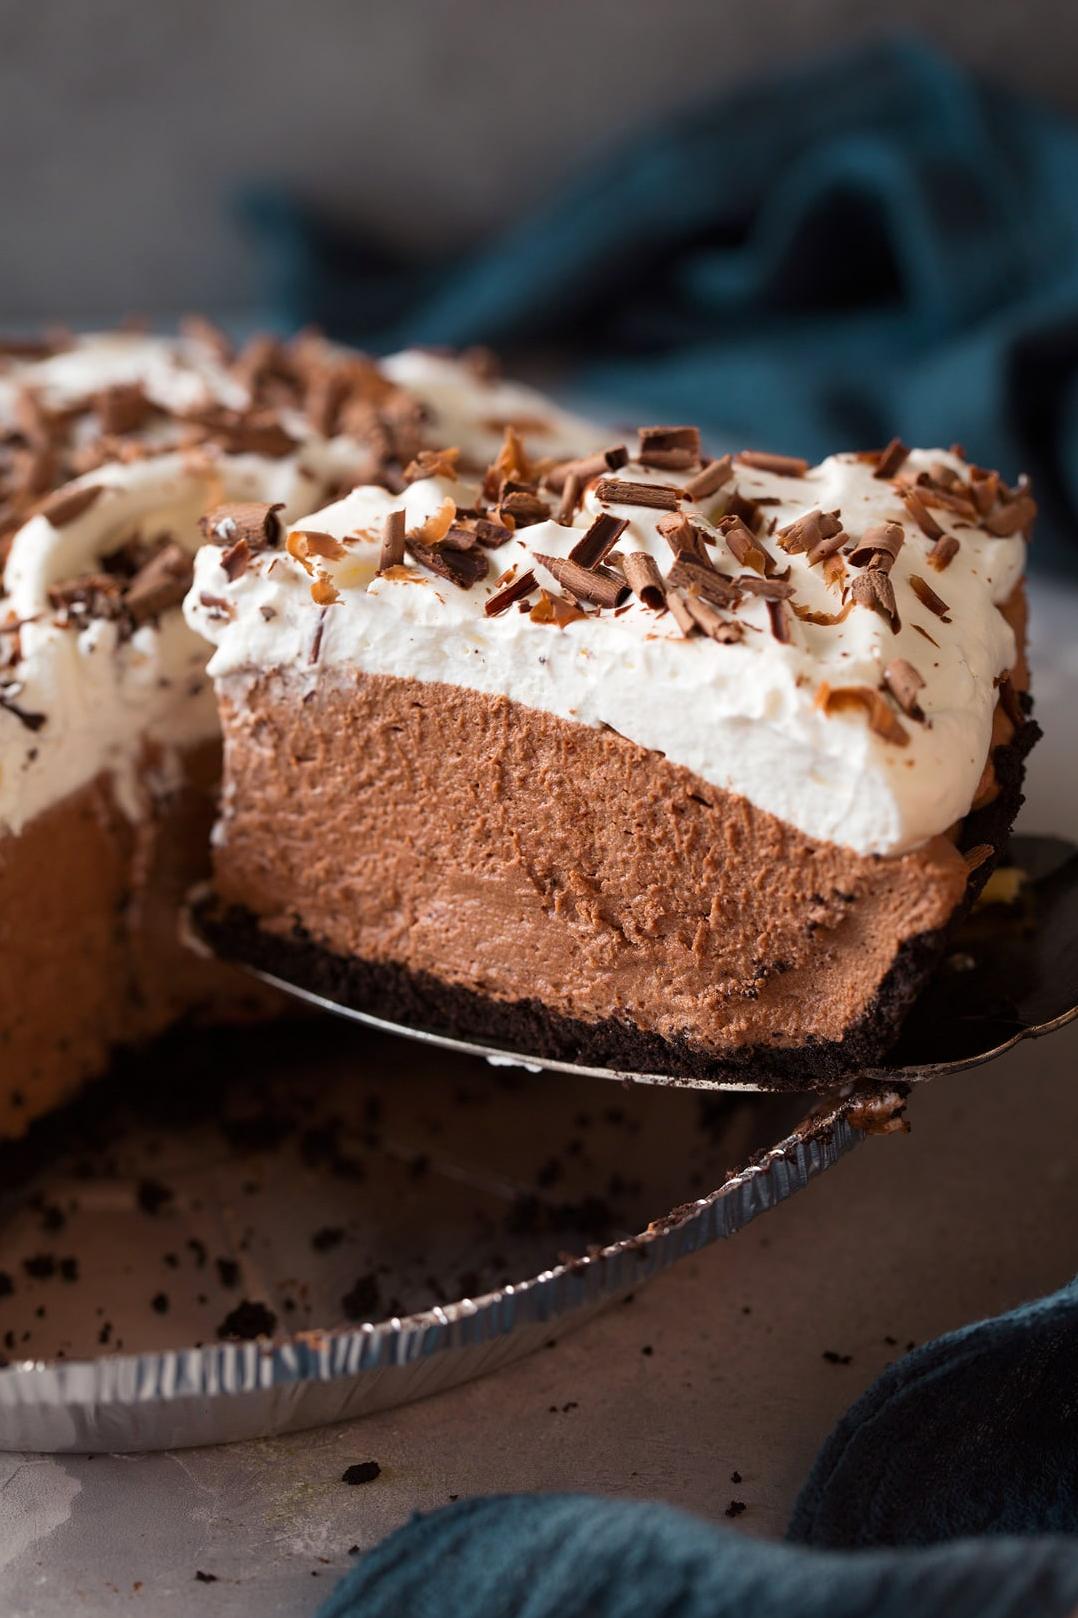  Get ready to savor every bite with this delicious and airy coffee dessert.